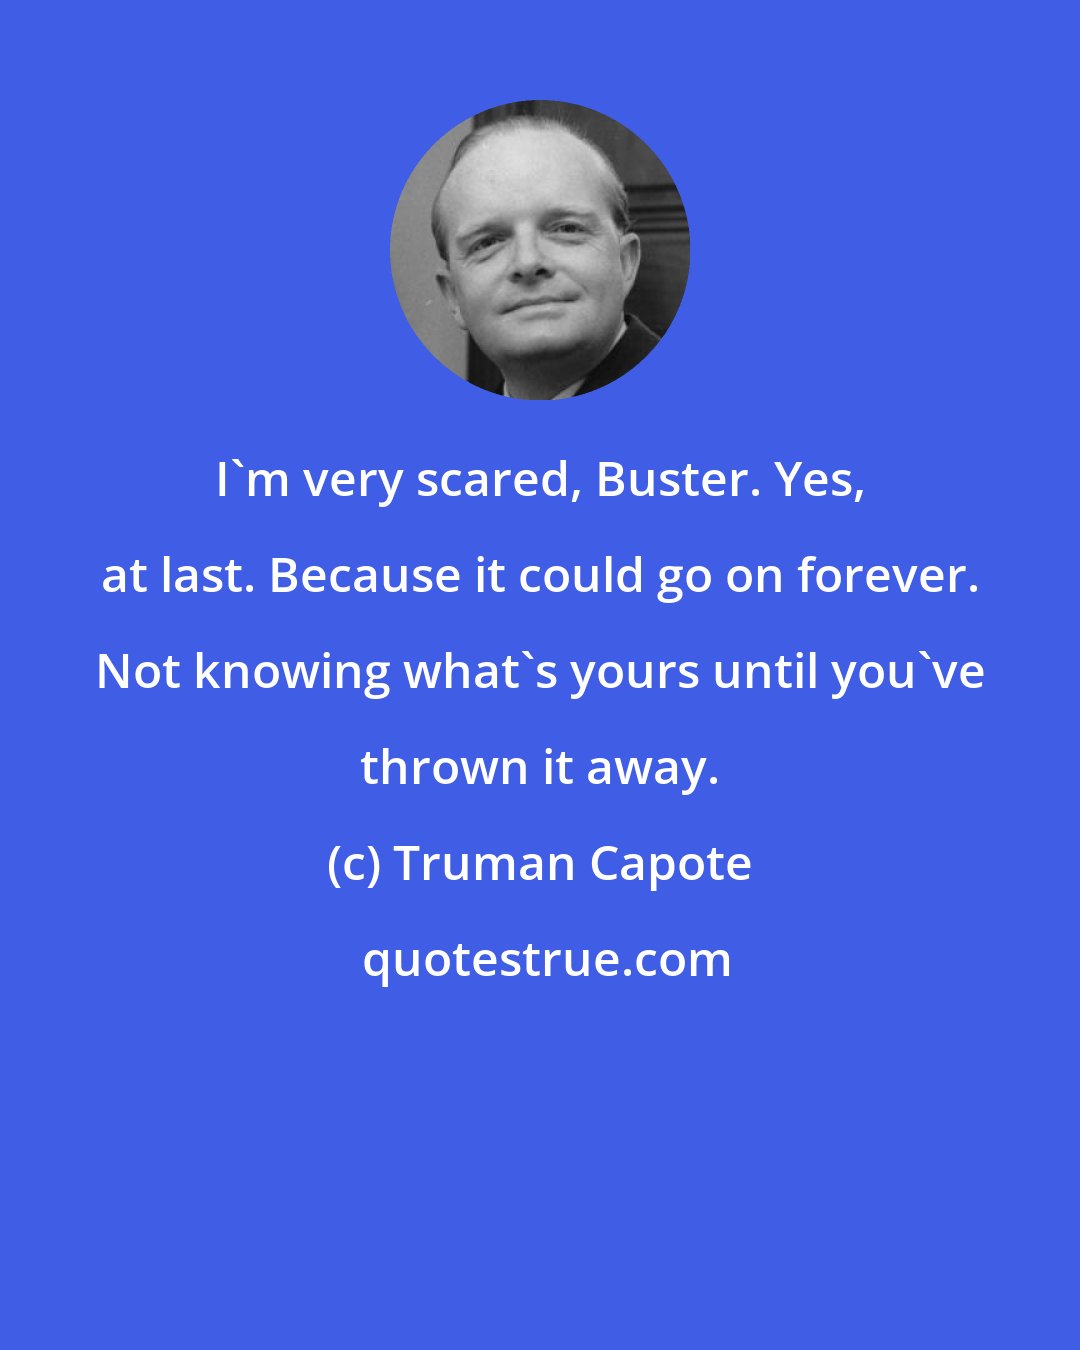 Truman Capote: I'm very scared, Buster. Yes, at last. Because it could go on forever. Not knowing what's yours until you've thrown it away.